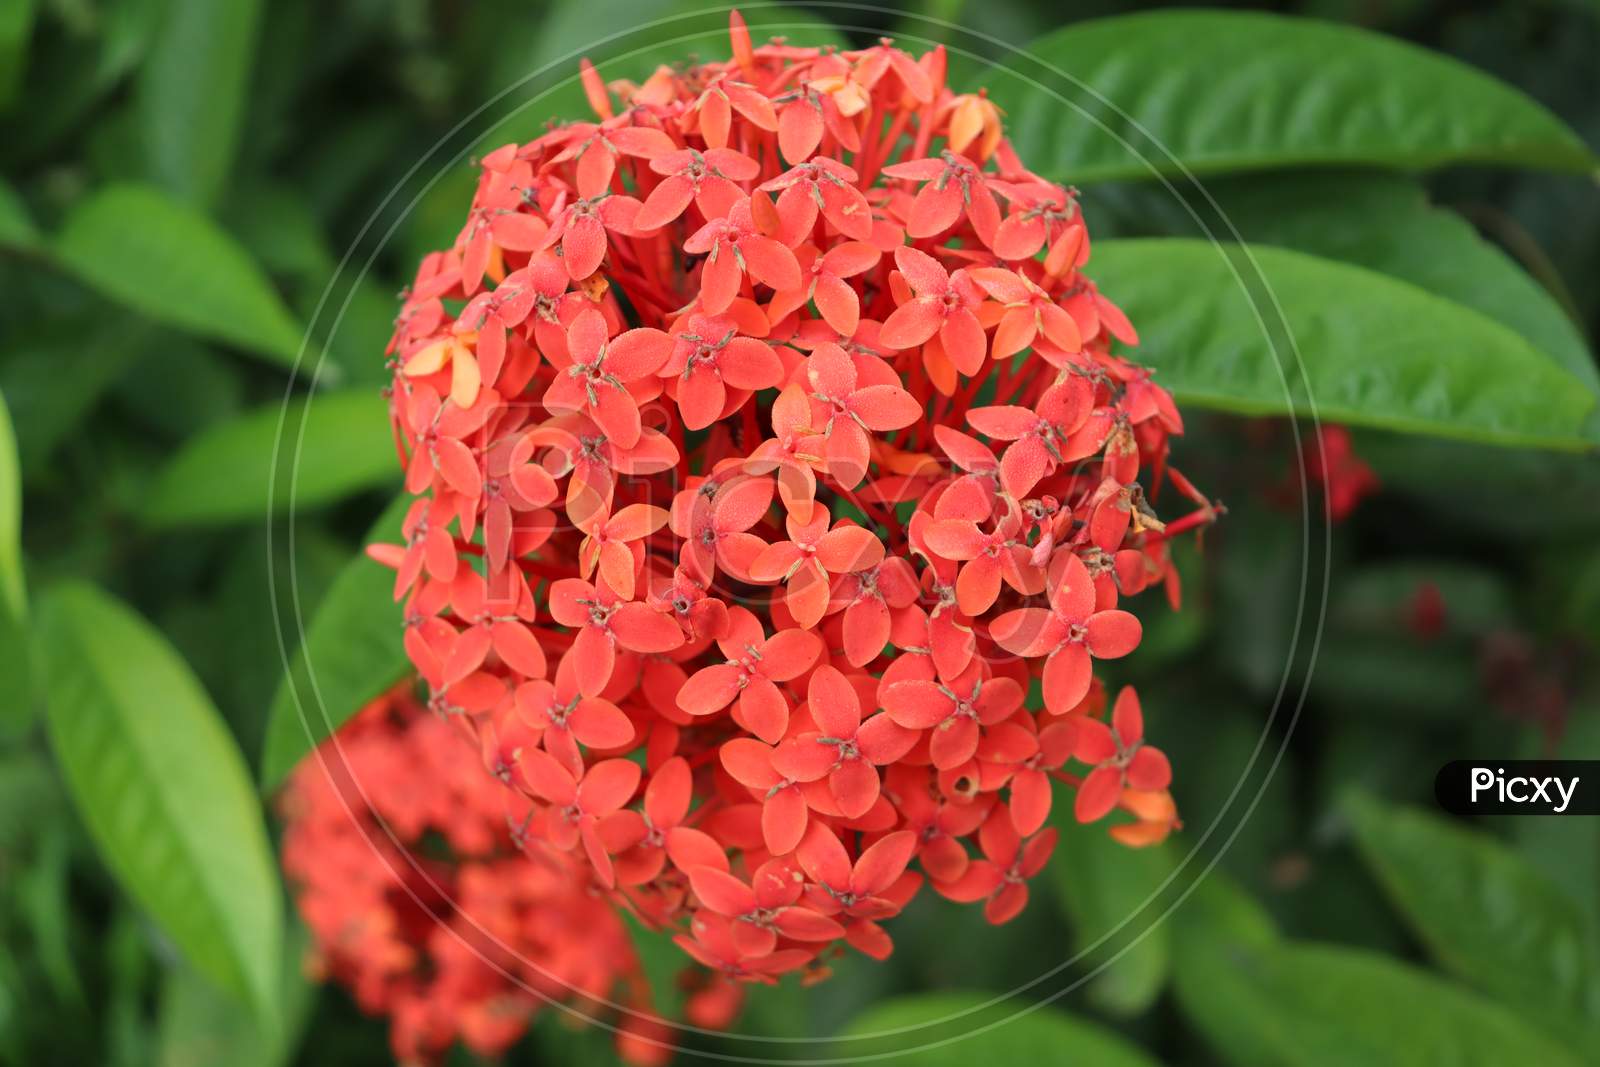 Red Spike flowers, Stock Image